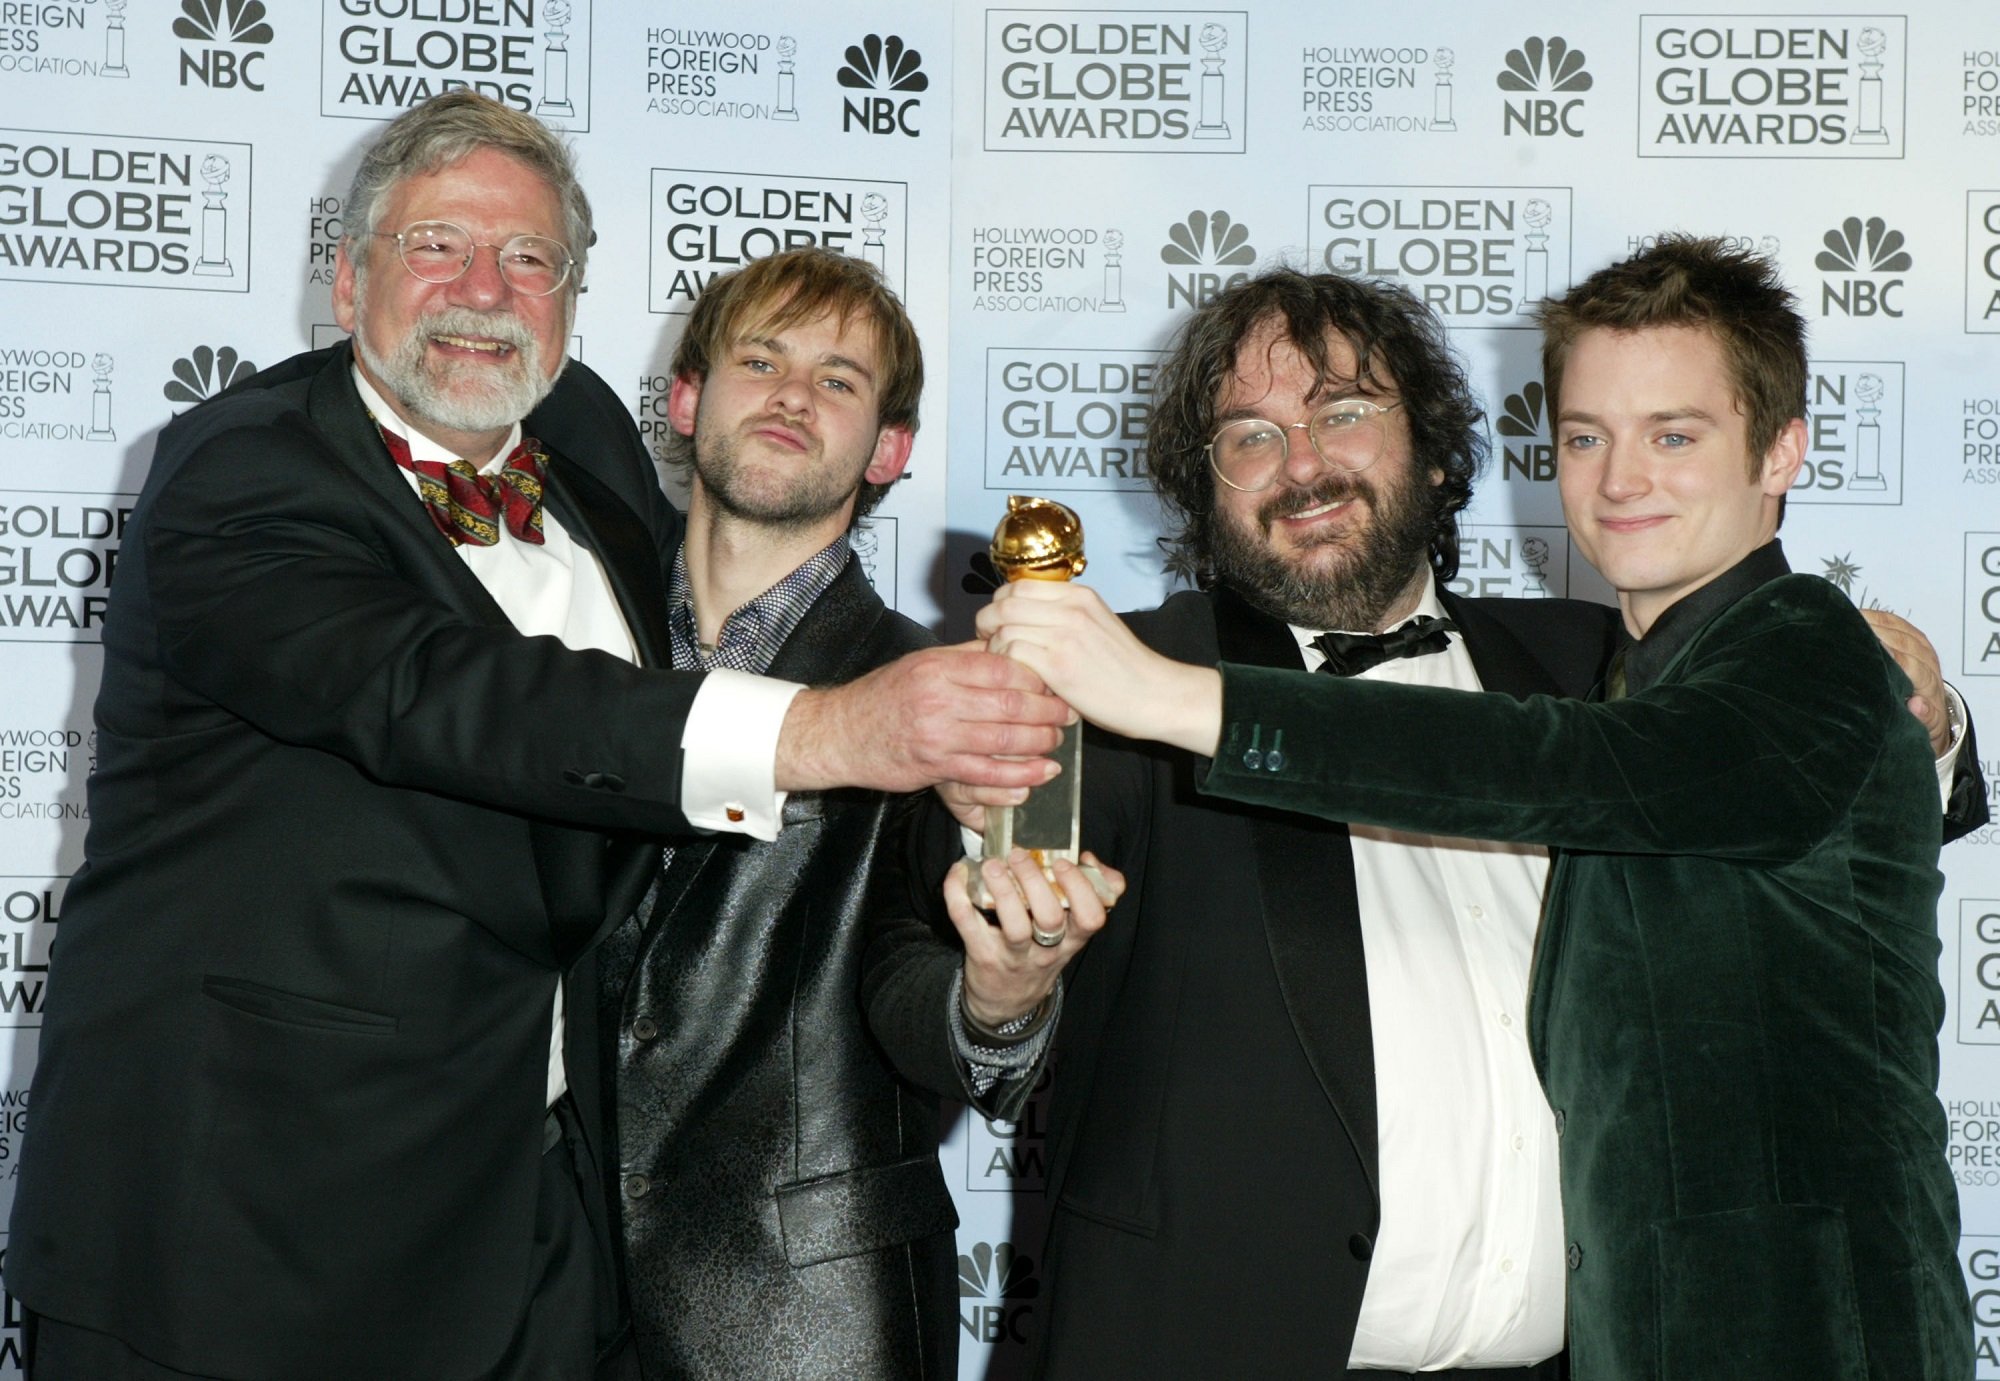 Barrie M. Osbourne, Dominic Monaghan, Peter Jackson, and Elijah Wood, of Lord of the Rings 